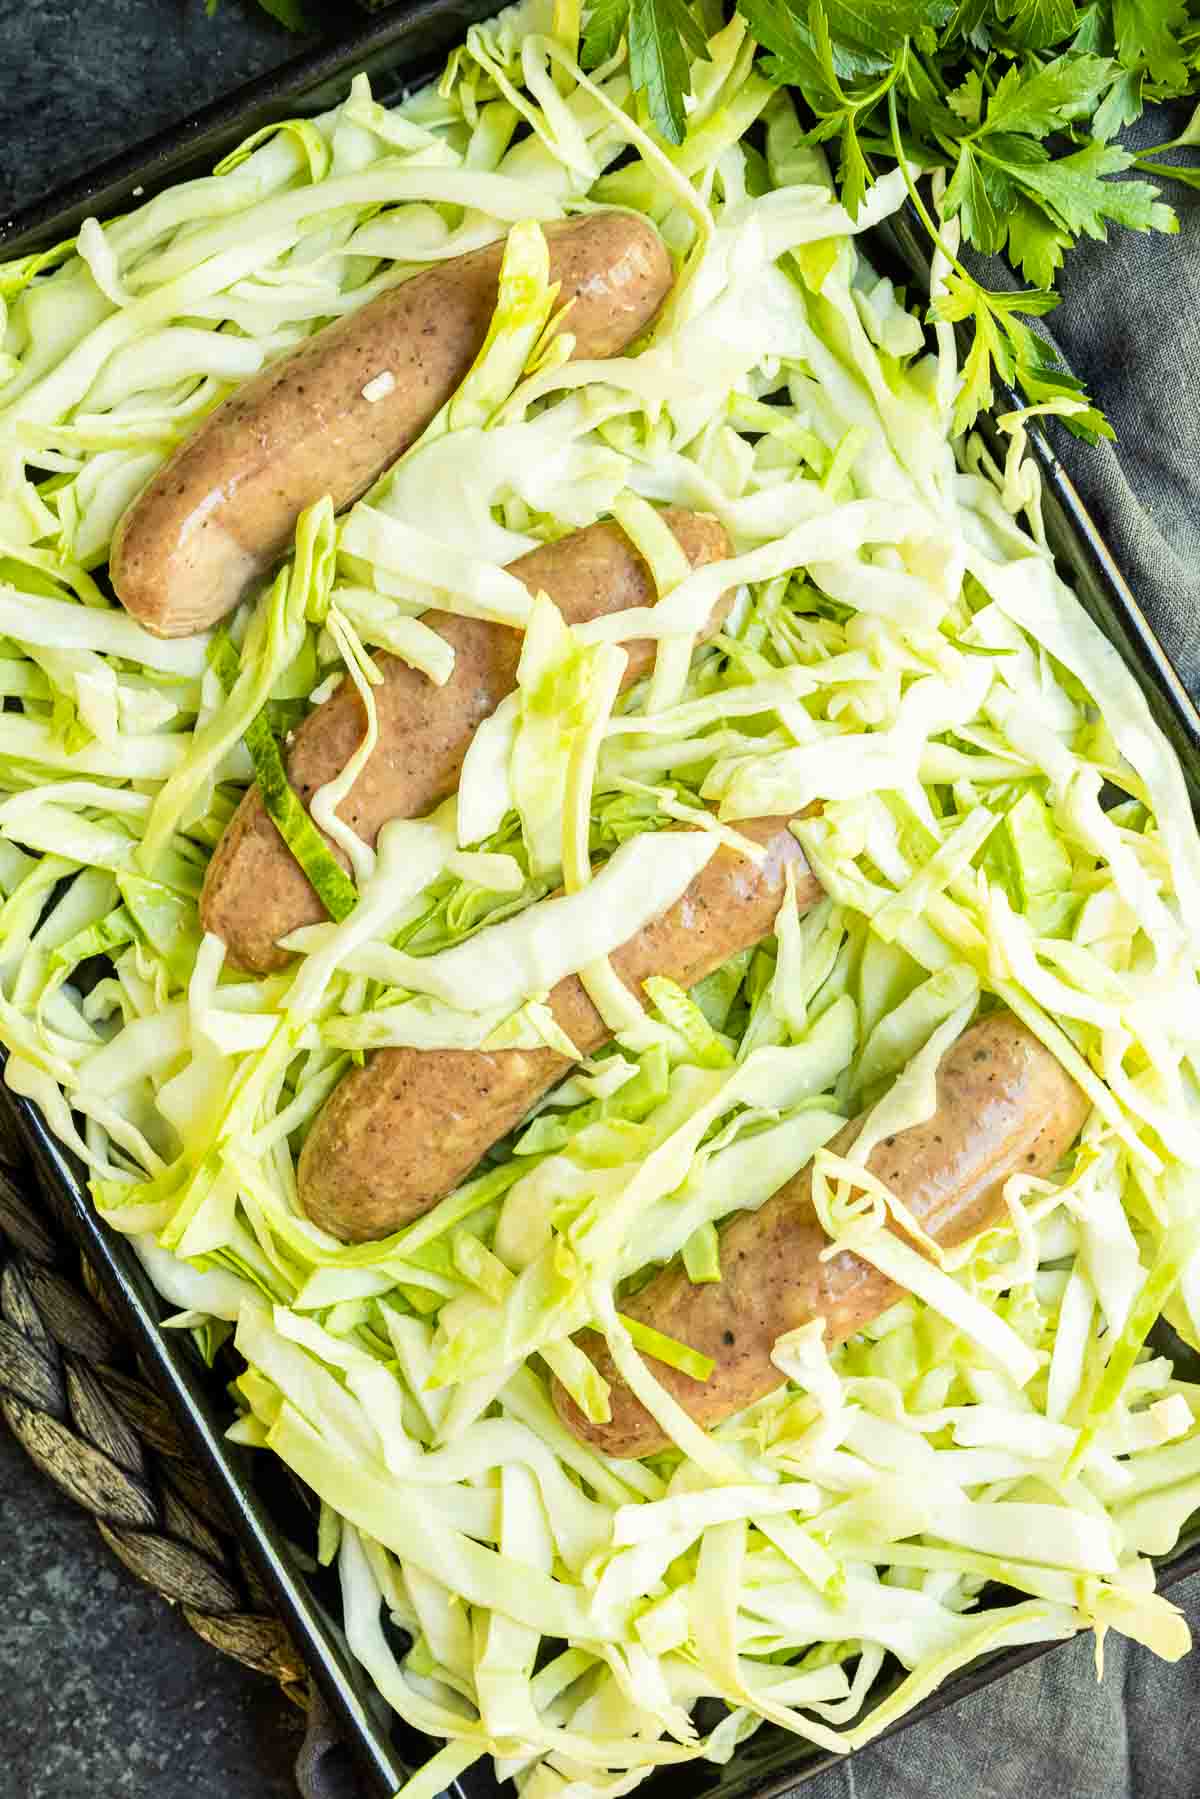 Sheet pan with uncooked cabbage and sausage